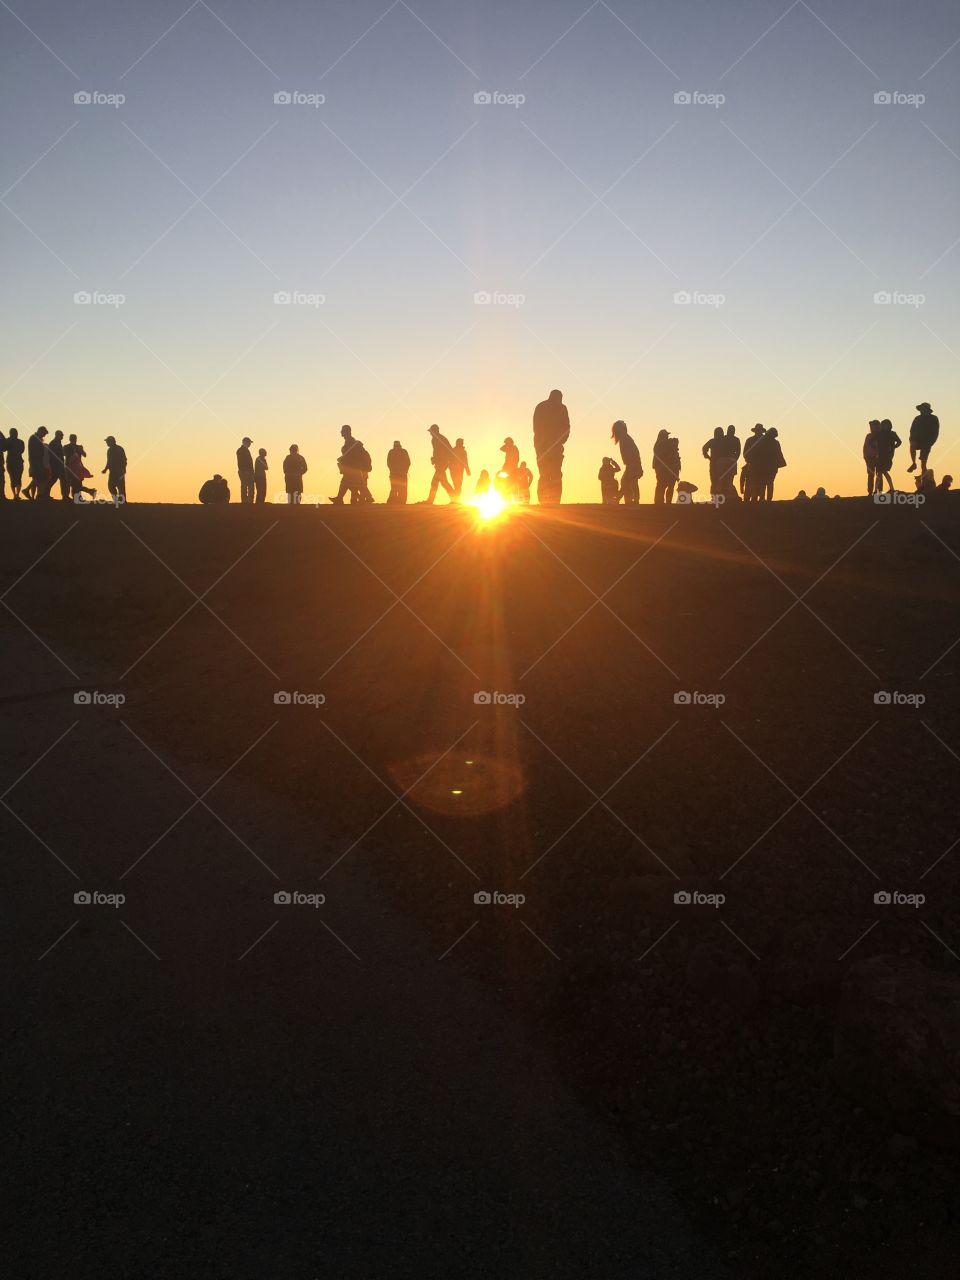 A group of people stand along a mountain ledge, silhouetted by the sunset.